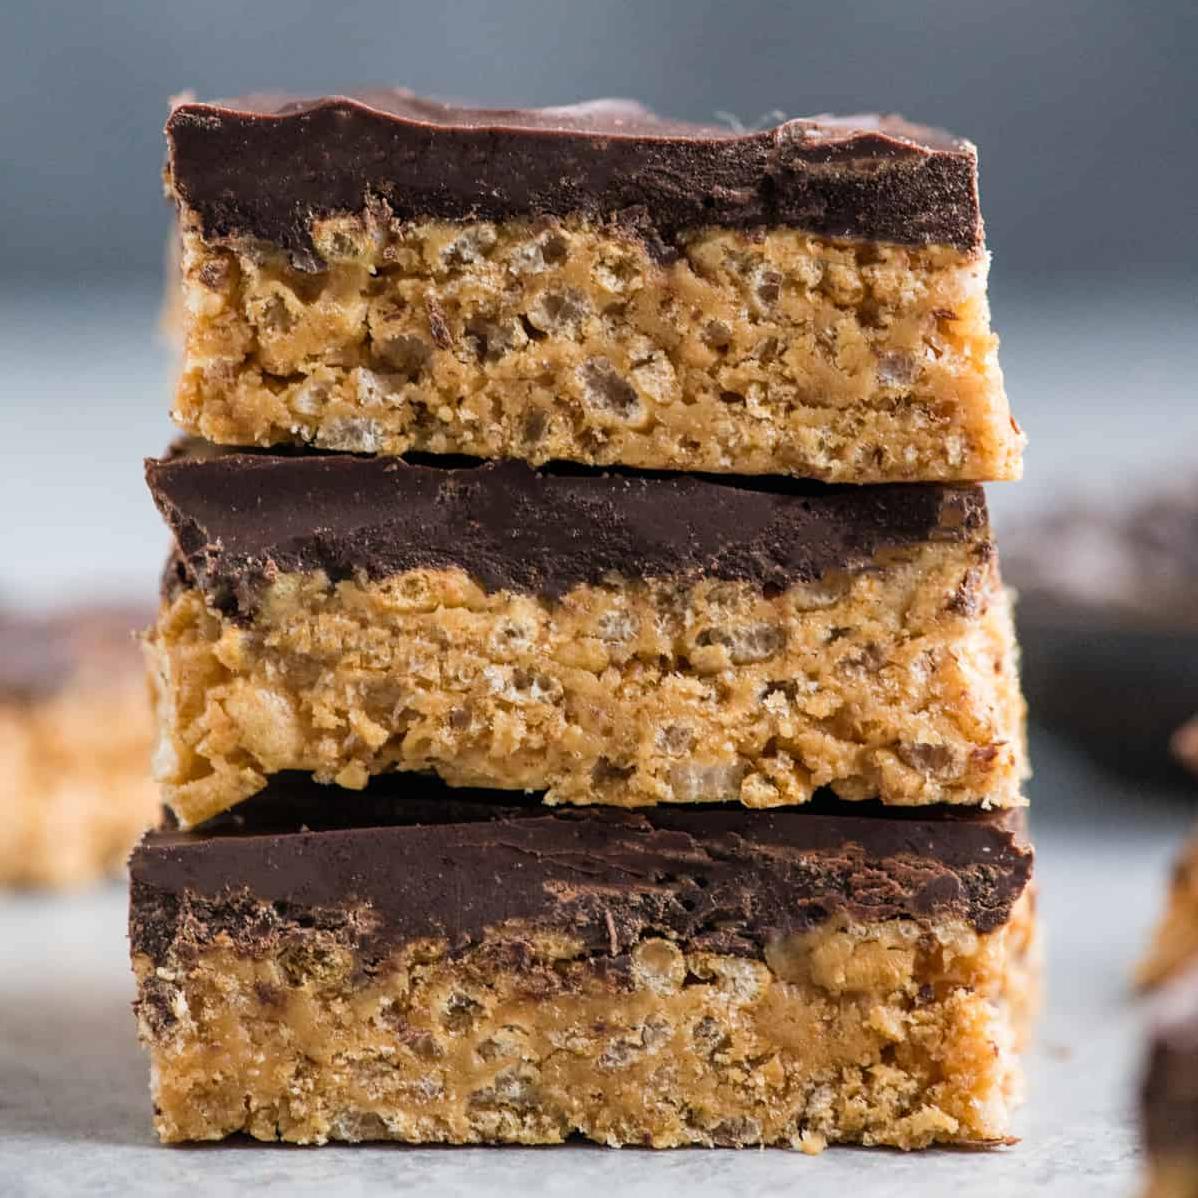  Say goodbye to artificial flavors and hello to wholesome goodness with these peanut krispy treats.